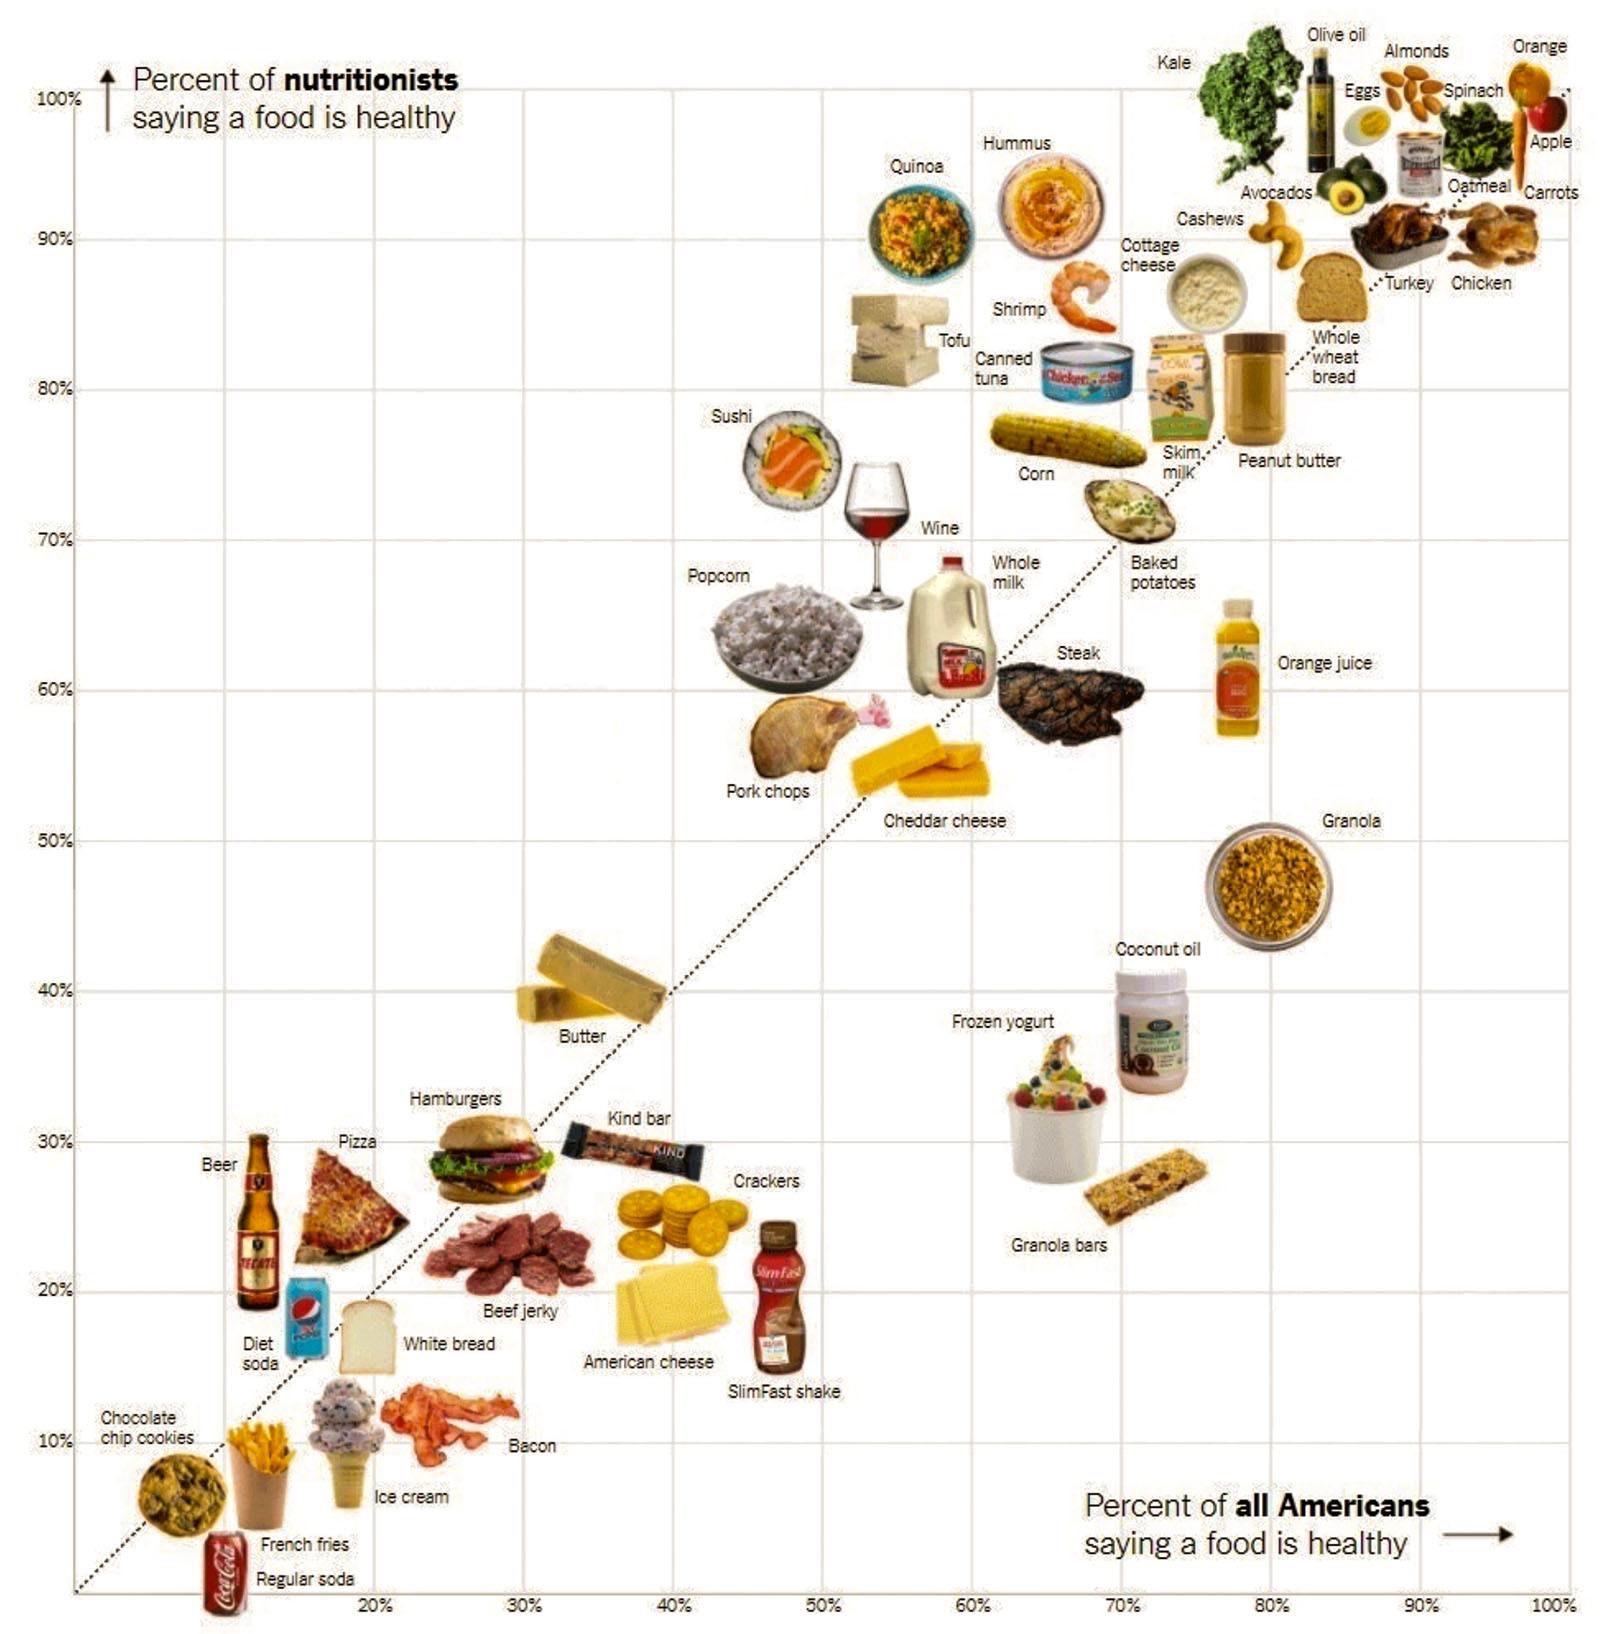 Different foods plotted by the percent of Americans who say the food is healthy vs. the percent of nutritionists who say the food is healthy. Source: The New York Times.